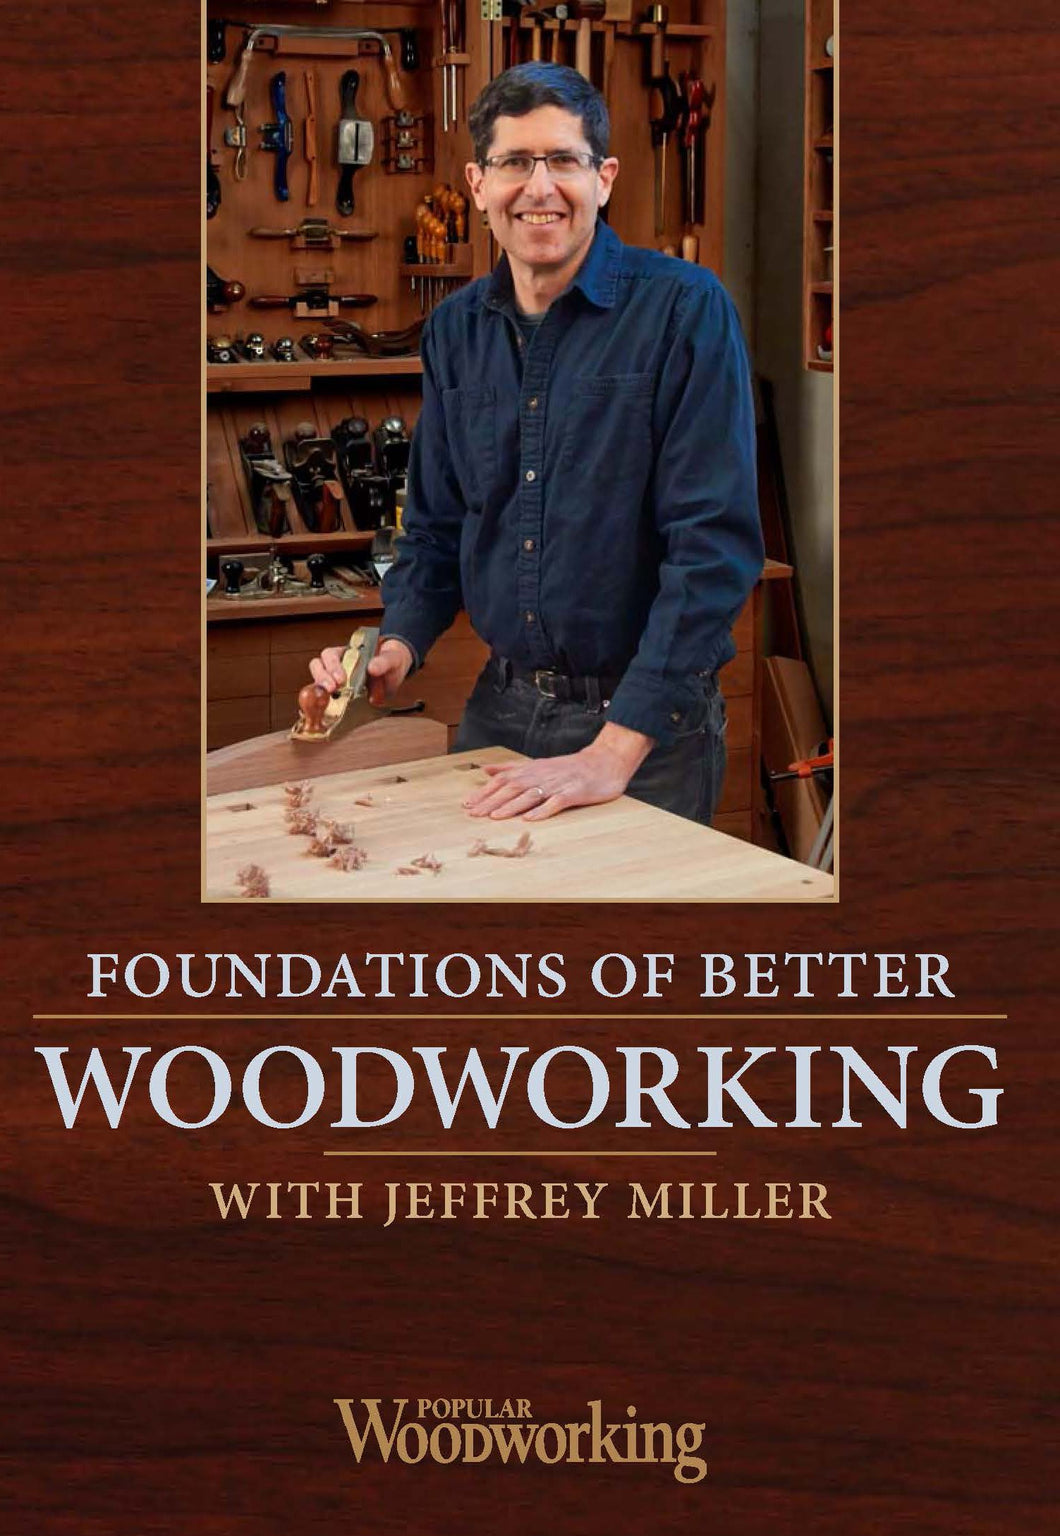 Foundations of Better Woodworking with Jeffrey Miller  Video Download